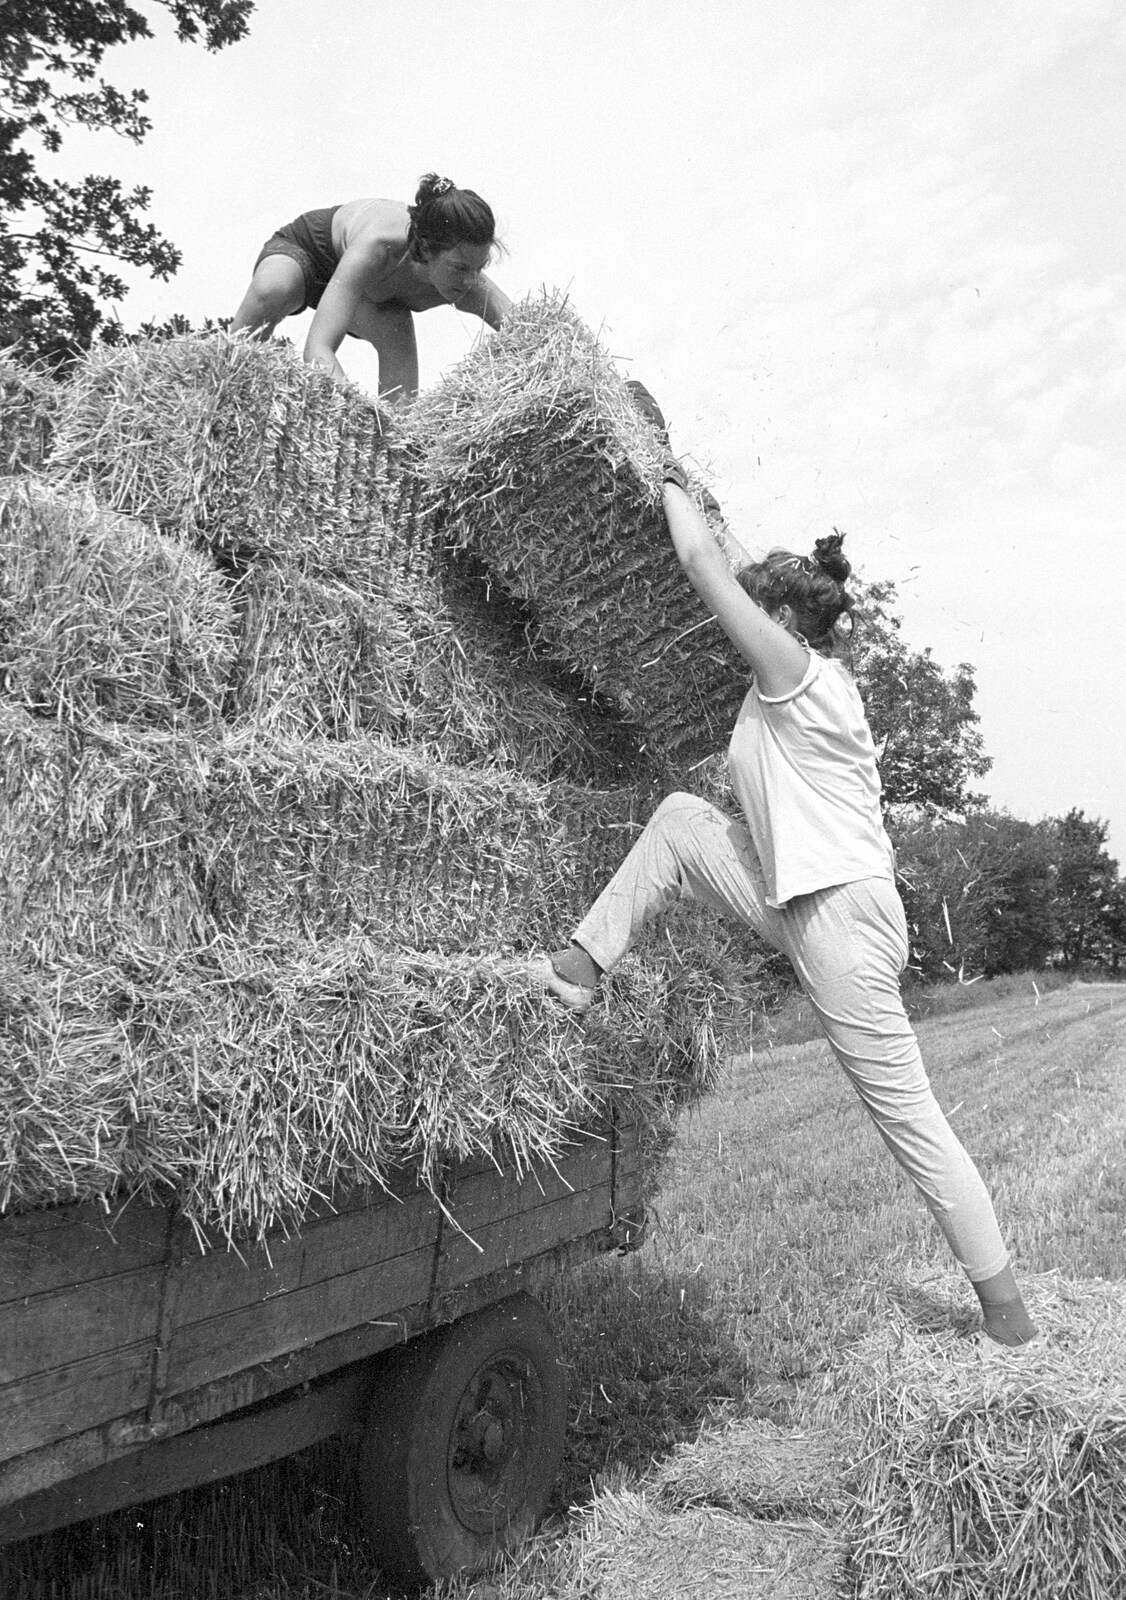 Rachel half-climbs up to shift a bale from Working on the Harvest, Tibenham, Norfolk - 11th August 1992